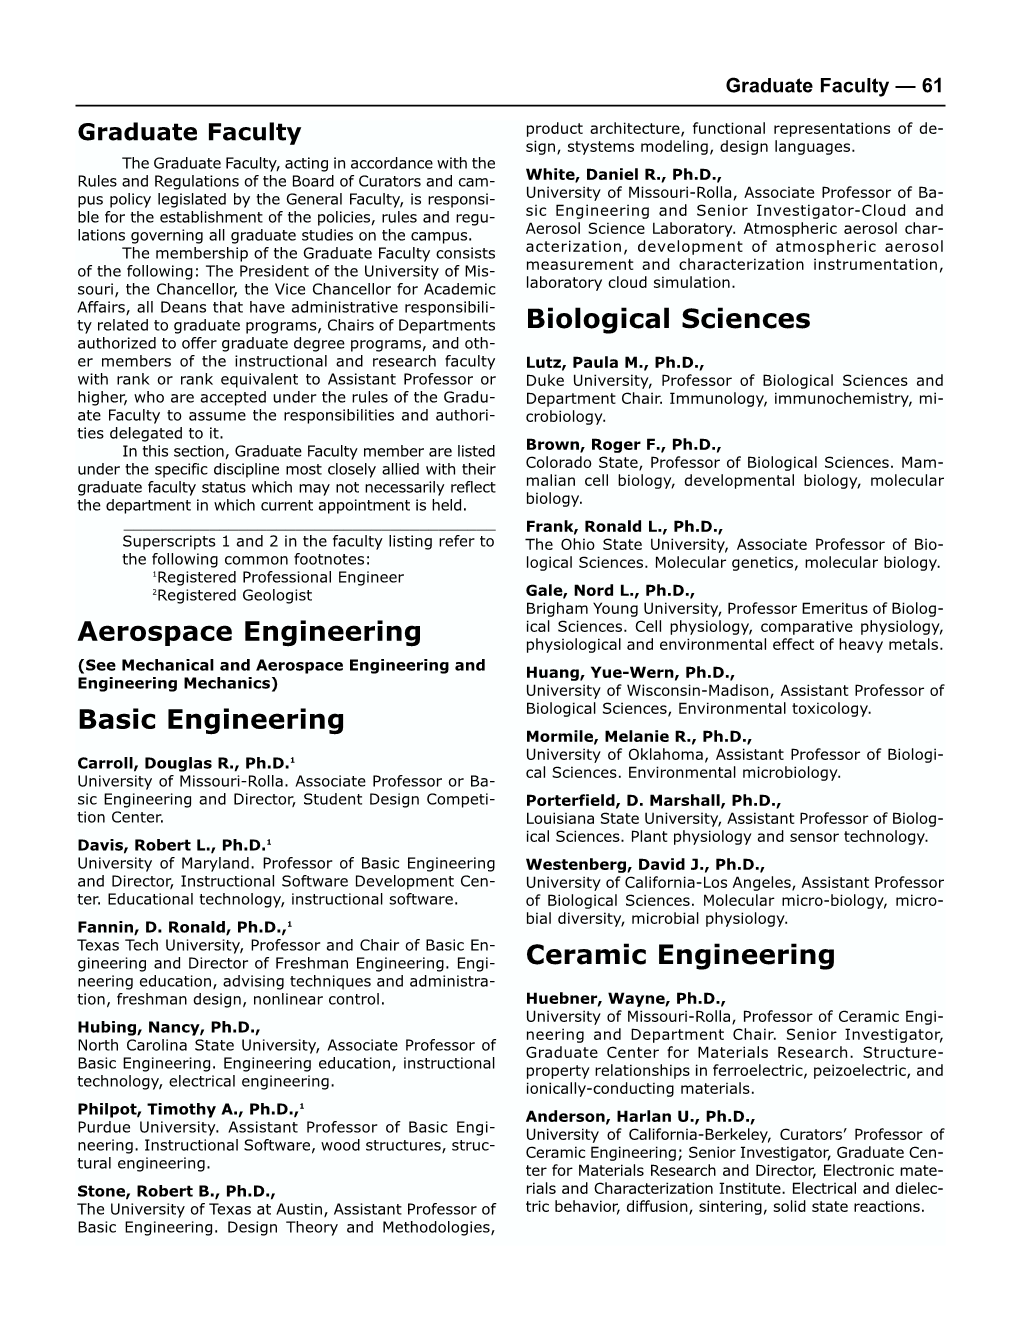 Aerospace Engineering Physiological and Environmental Effect of Heavy Metals